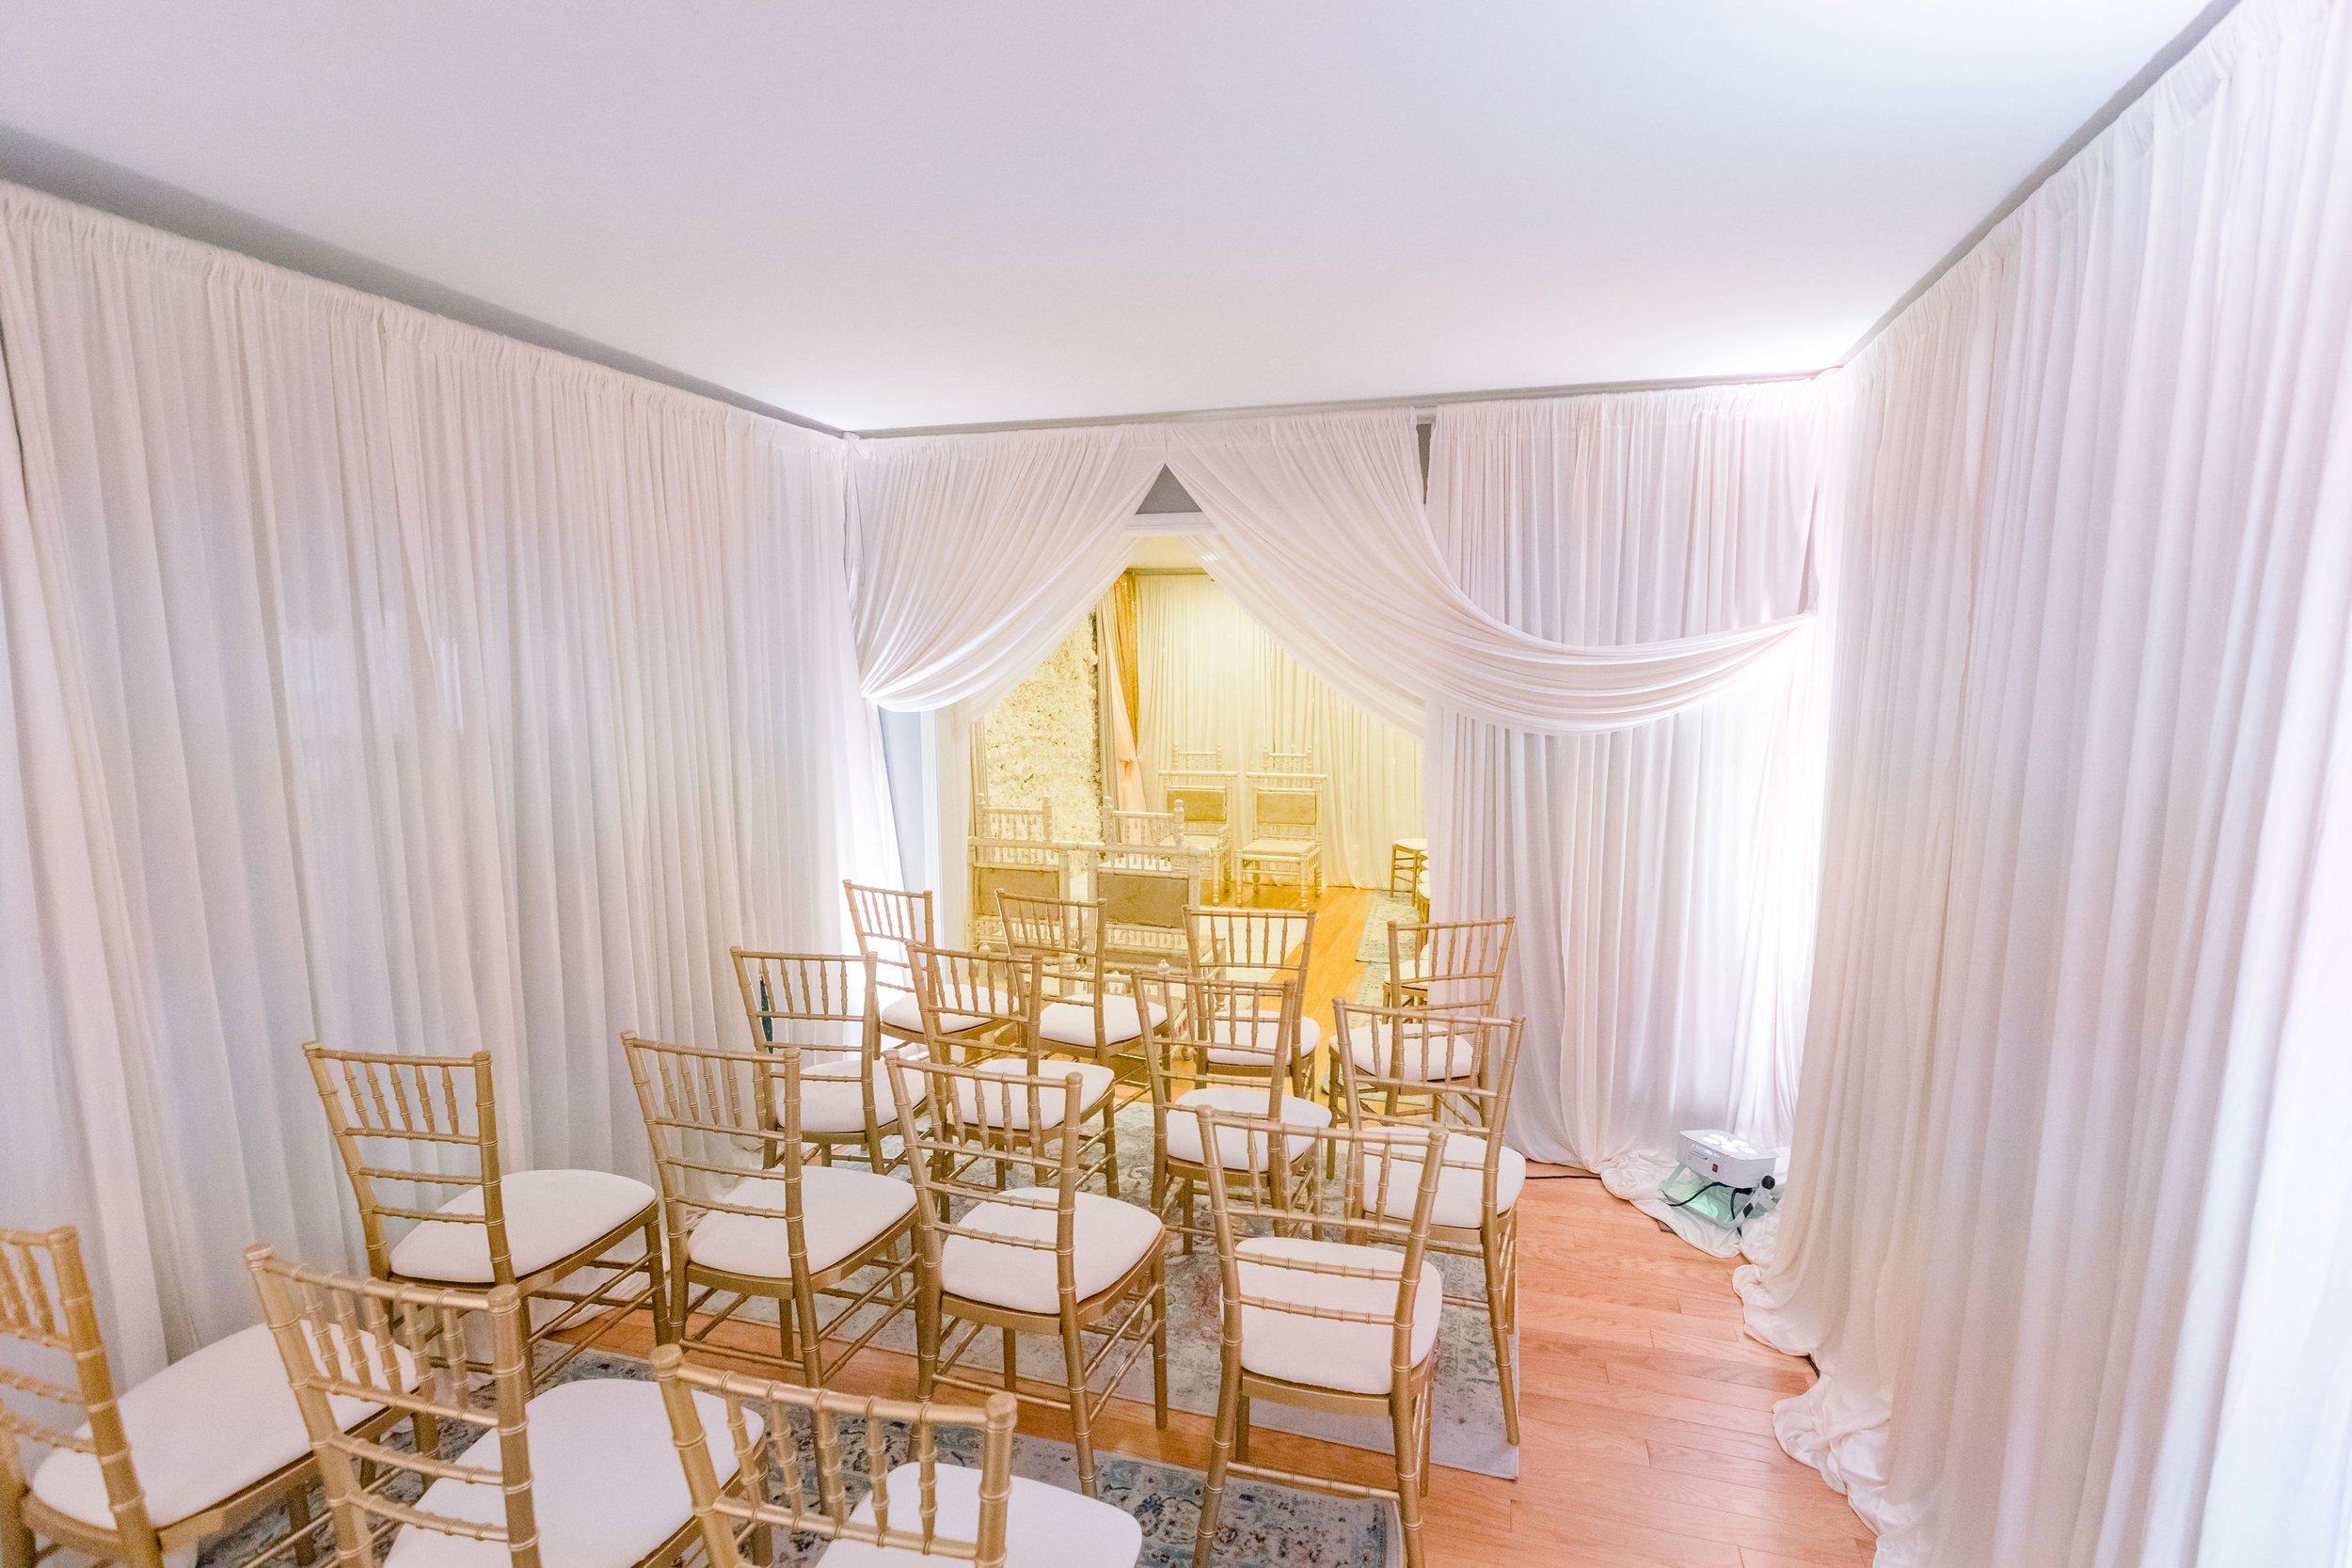 Basement wall draping wedding in the living room garage wall draping intimate wedding at home micro wedding event in chicago chiavari chairs table ren (6).jpg